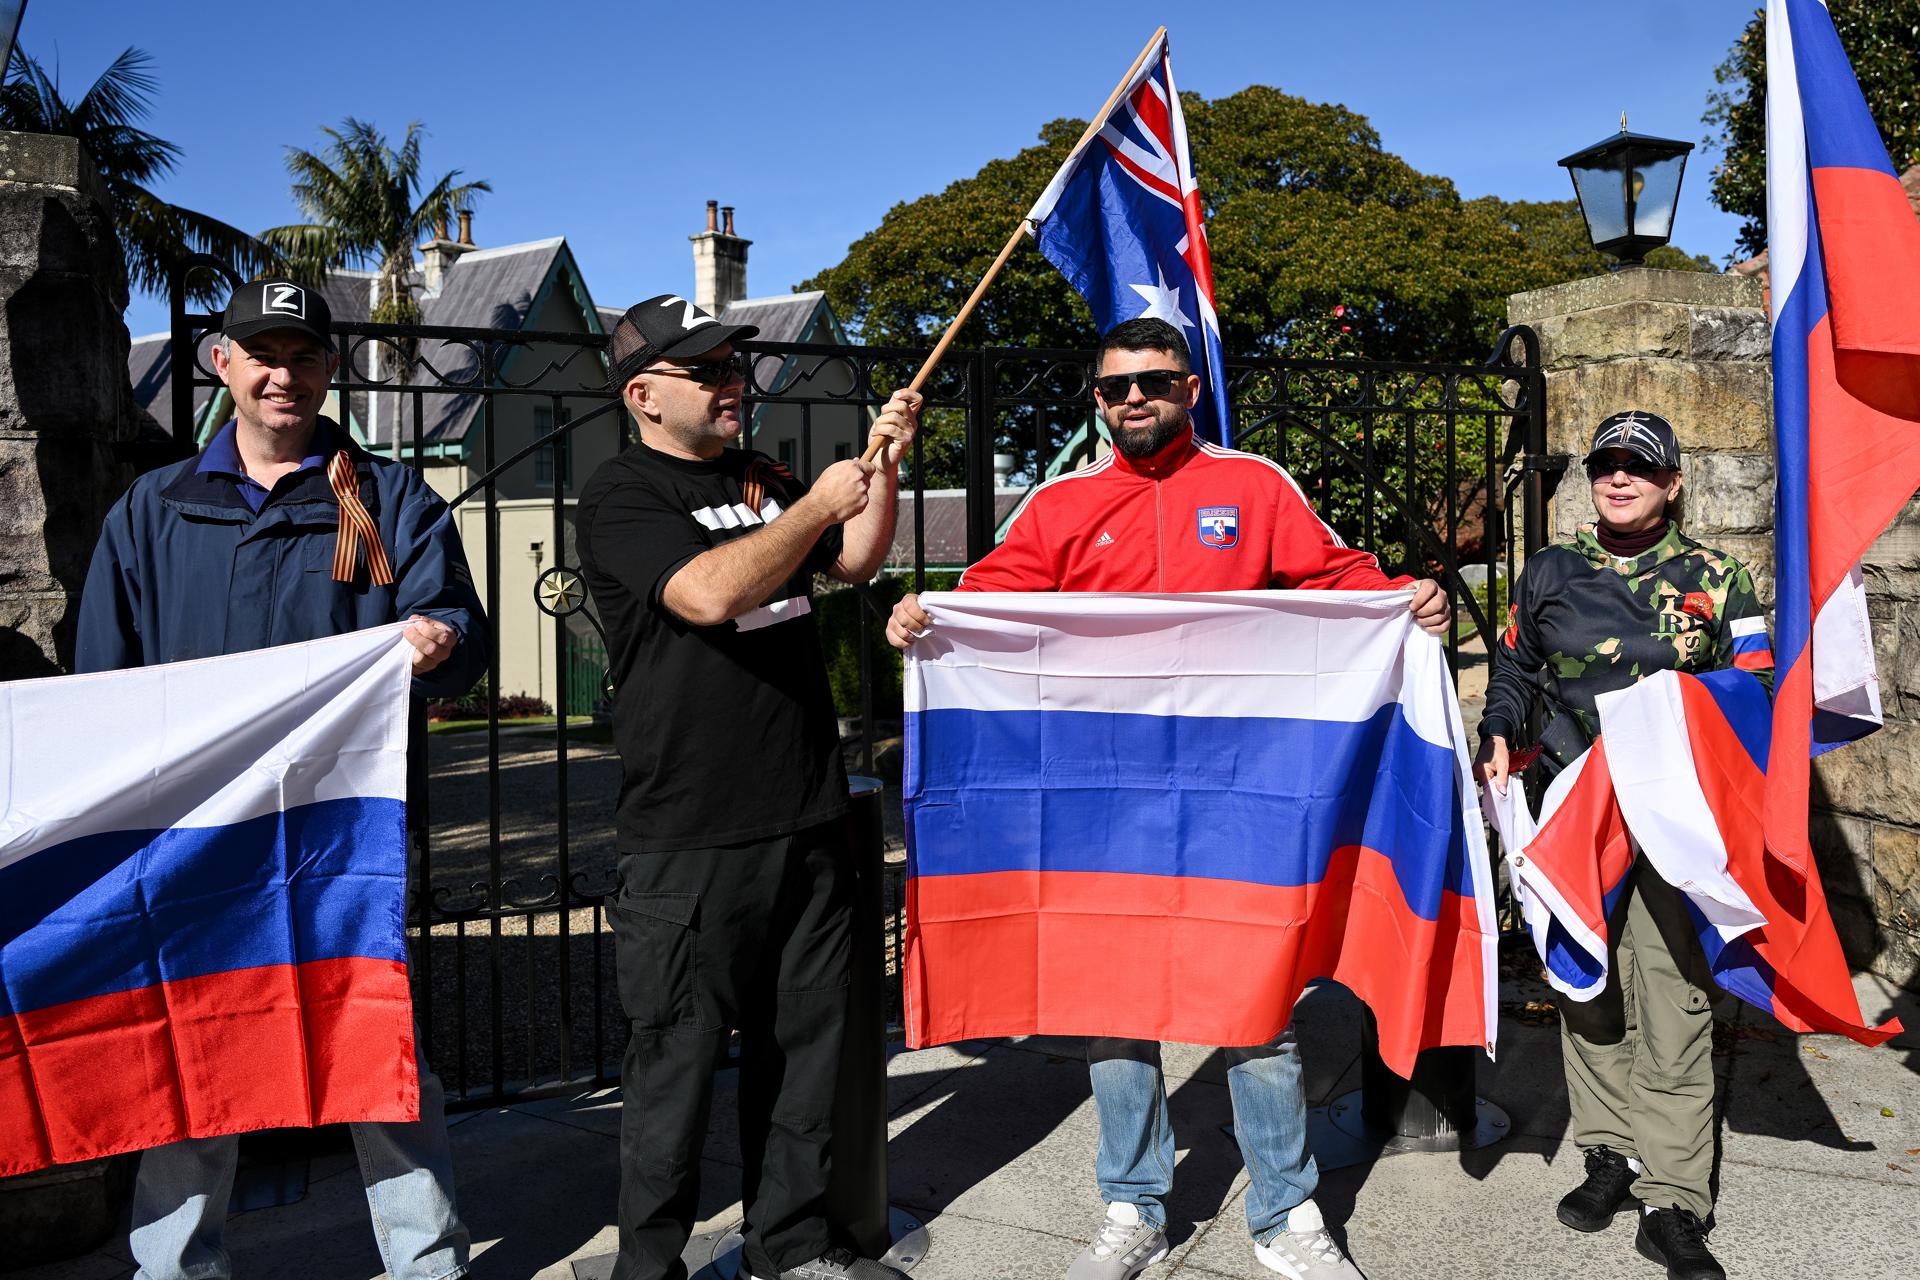 People participate in a pro-Russian protest at Kirribilli House in Sydney, Australia, 24 June 2023. EFE-EPA/STEVEN MARKHAM AUSTRALIA AND NEW ZEALAND OUT
